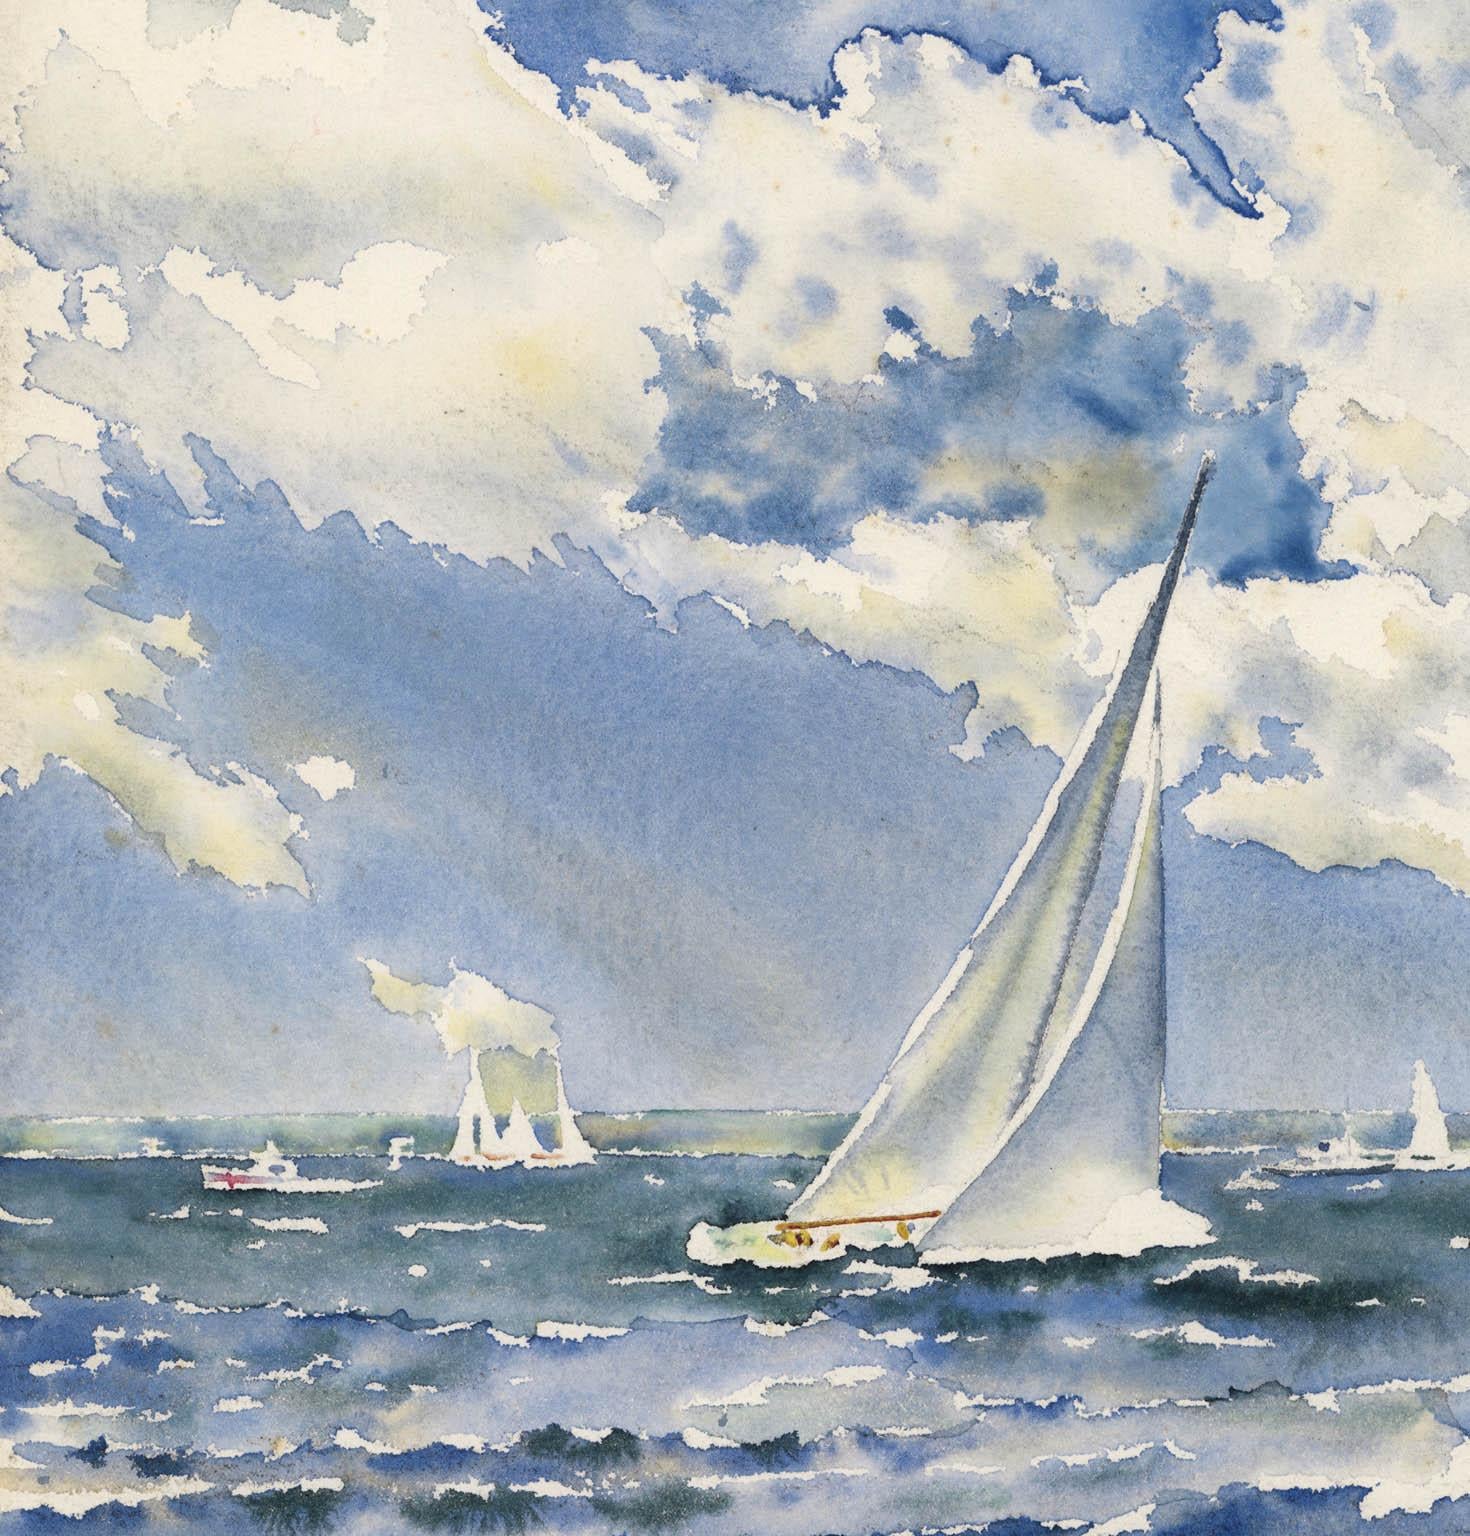 AMERICA'S CUP - 1967.  BEAT TO THE FINISH - INTREPID (USA) VS. DAME PATTIE (AUS) - Gray Landscape Art by Joseph Webster Golinkin